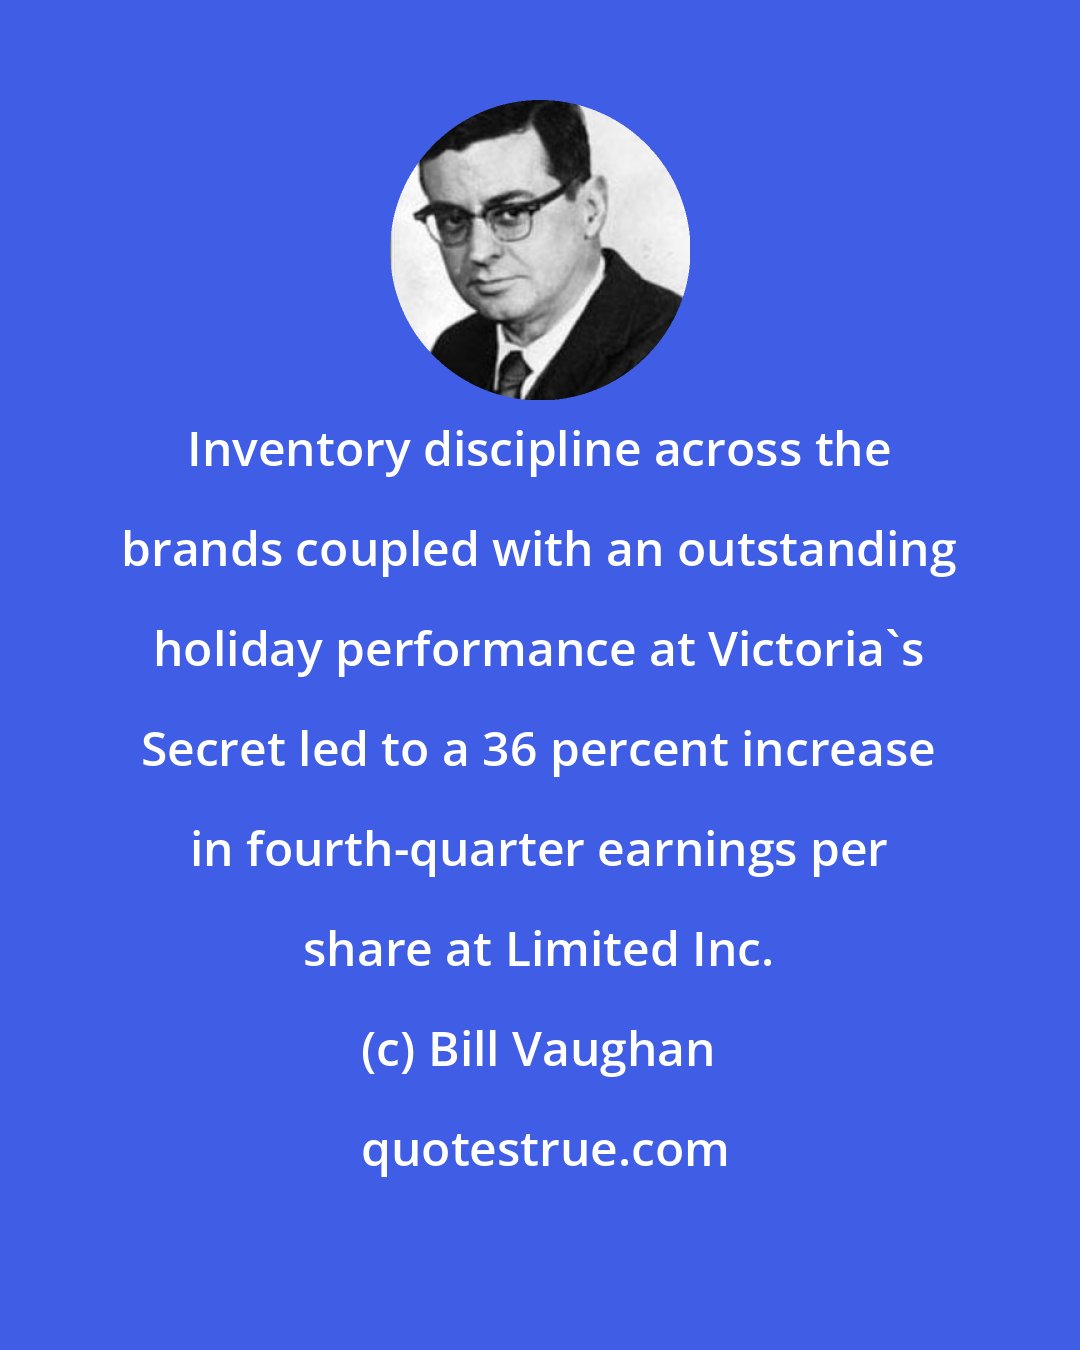 Bill Vaughan: Inventory discipline across the brands coupled with an outstanding holiday performance at Victoria's Secret led to a 36 percent increase in fourth-quarter earnings per share at Limited Inc.